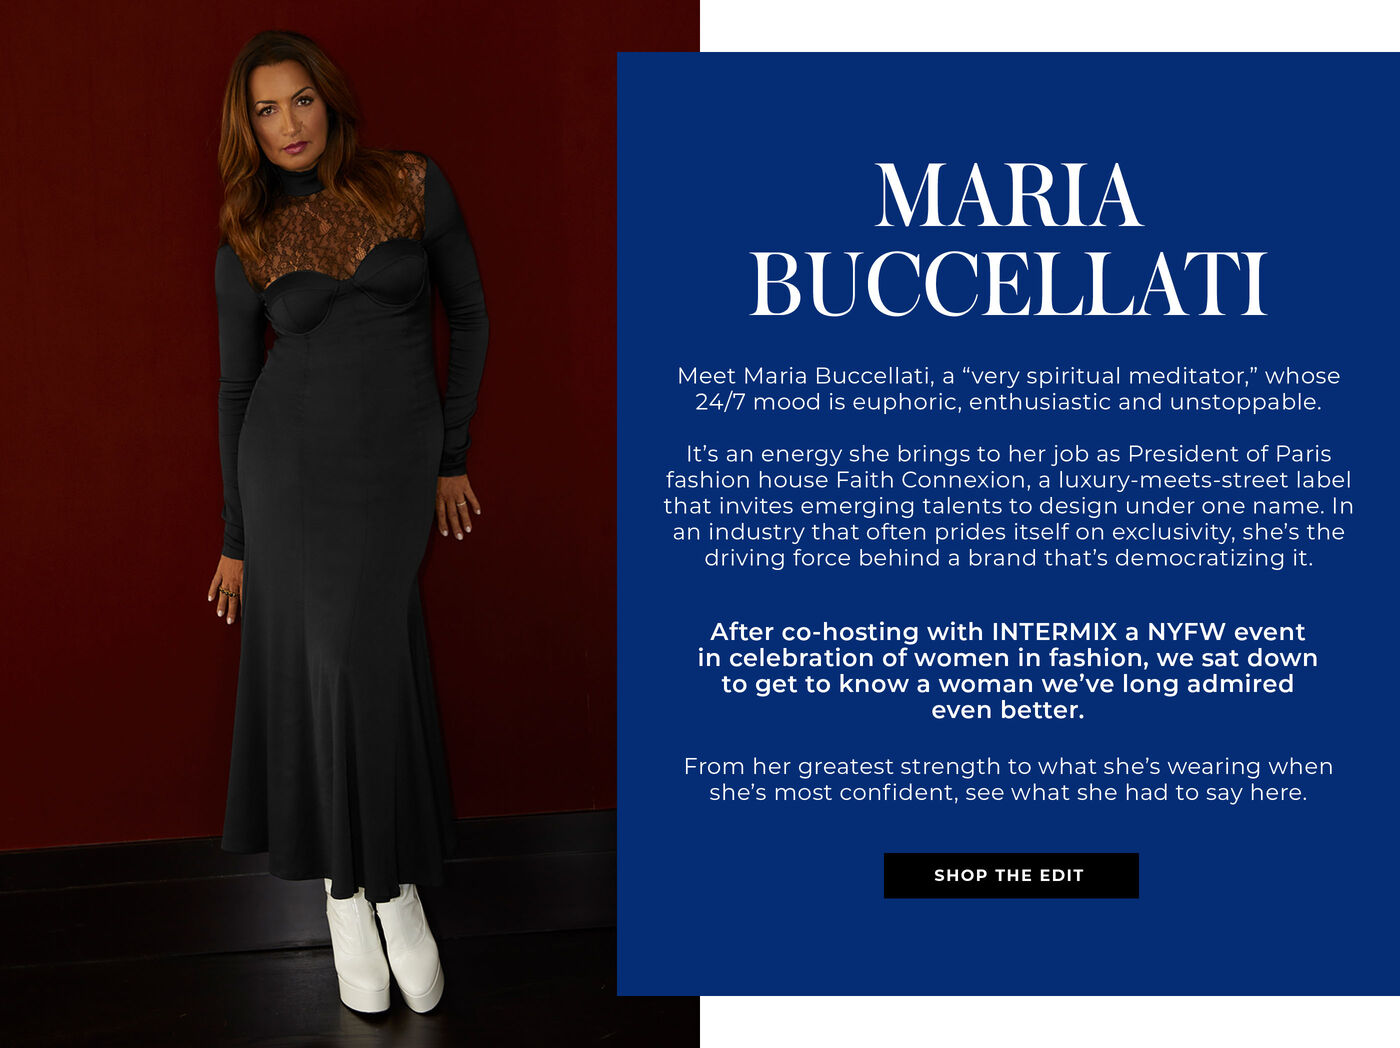 "Meet Maria Buccellati, a “very spiritual meditator,” whose 24/7 mood is euphoric, enthusiastic and unstoppable.   It’s an energy she brings to her job as President of Paris fashion house Faith Connexion, a luxury-meets-street label that invites emerging talents to design under one label. In an industry that often prides itself on exclusivity, she’s the driving force behind a brand that’s democratizing it.    After co-hosting with INTERMIX a NYFW event in celebration of women in fashion, we sat down to get to know a woman we’ve long admired even better.   From her greatest strength to what she’s wearing when she’s most confident, see what she had to say here. "